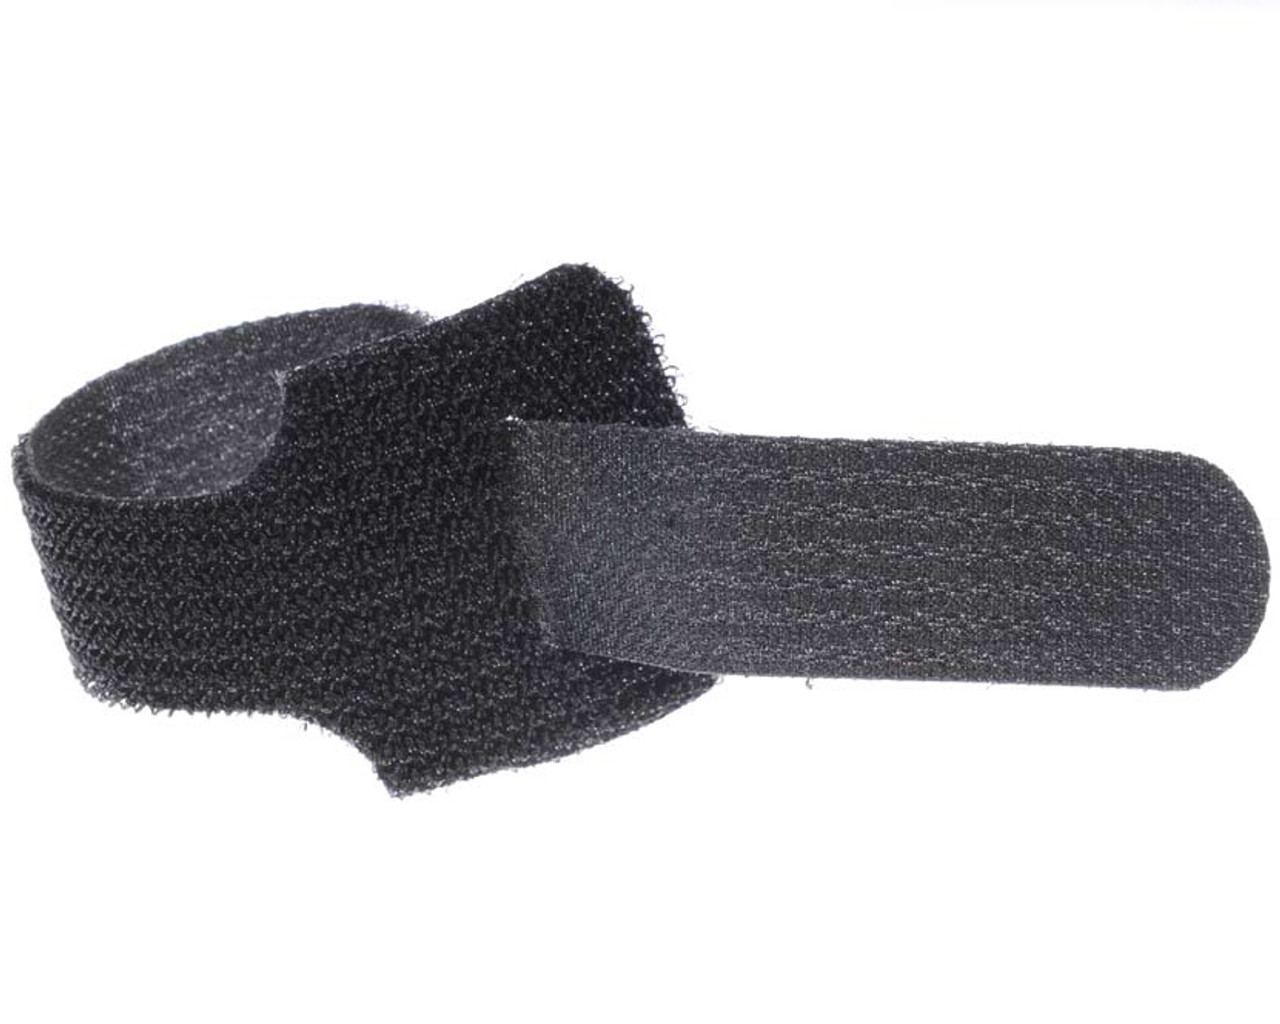 VELCRO® Brand ONE-WRAP® Cable Tie Strap in Black in 100 PCS-8 IN